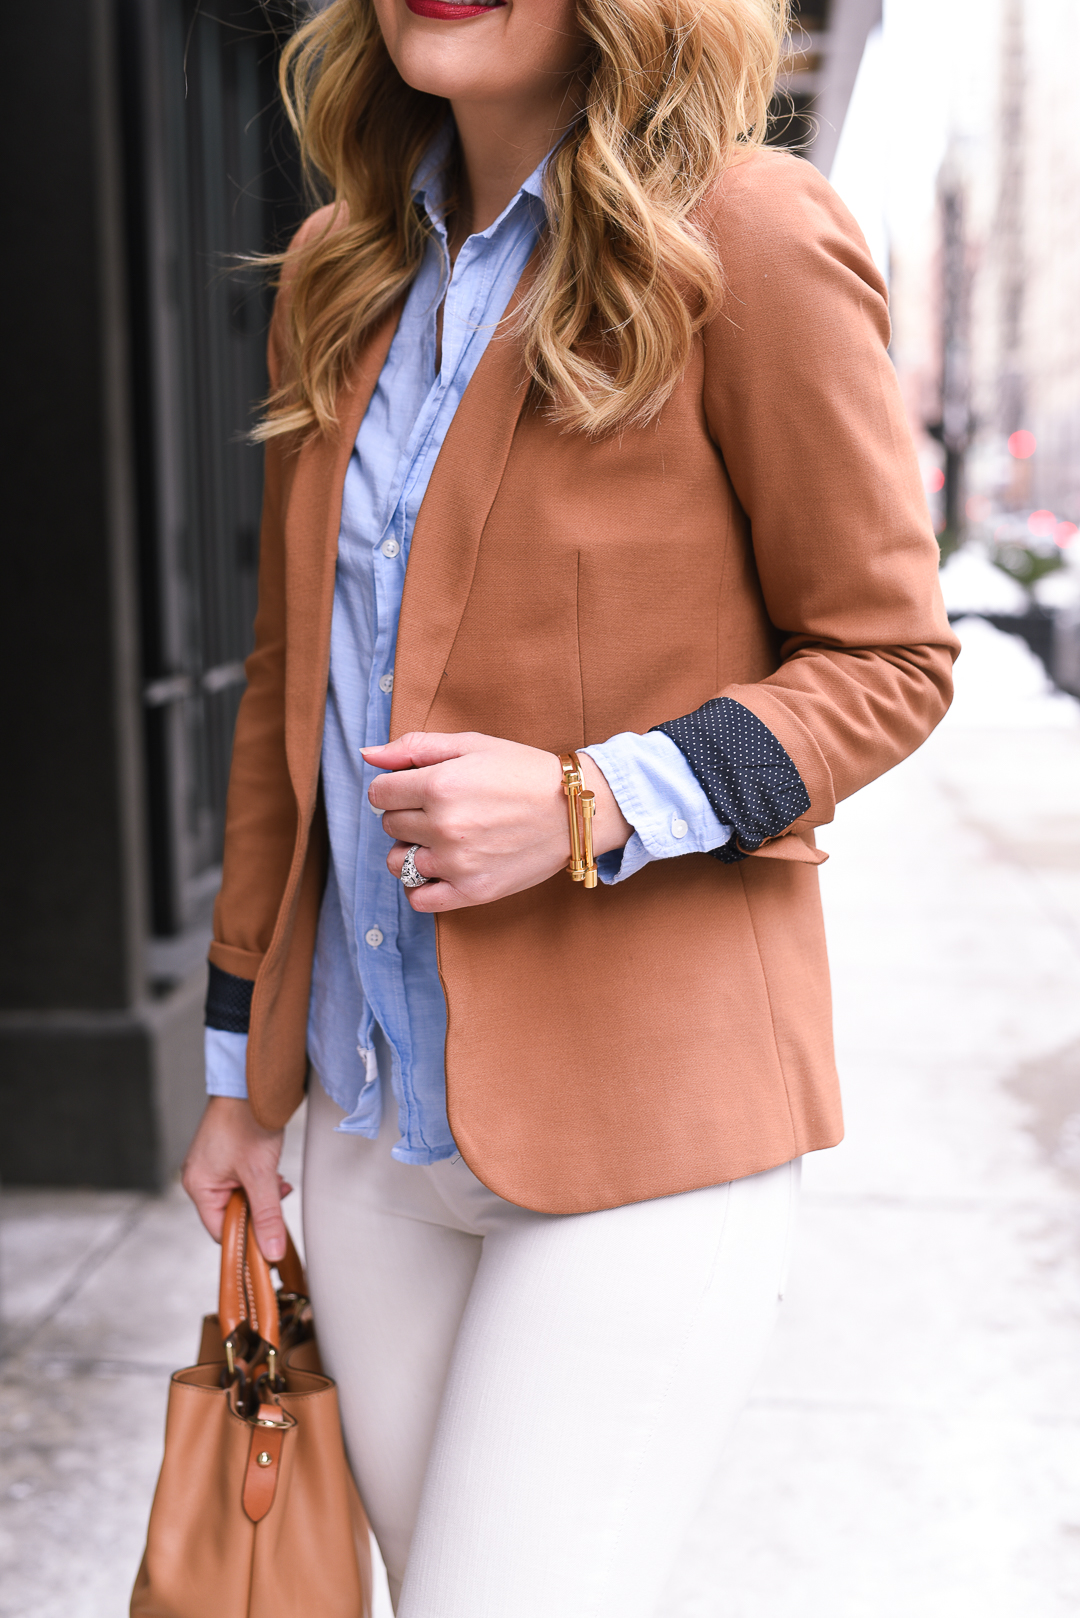 how to style a blazer for the office - Stylish Office Outfits by popular Chicago fashion blogger Visions of Vogue